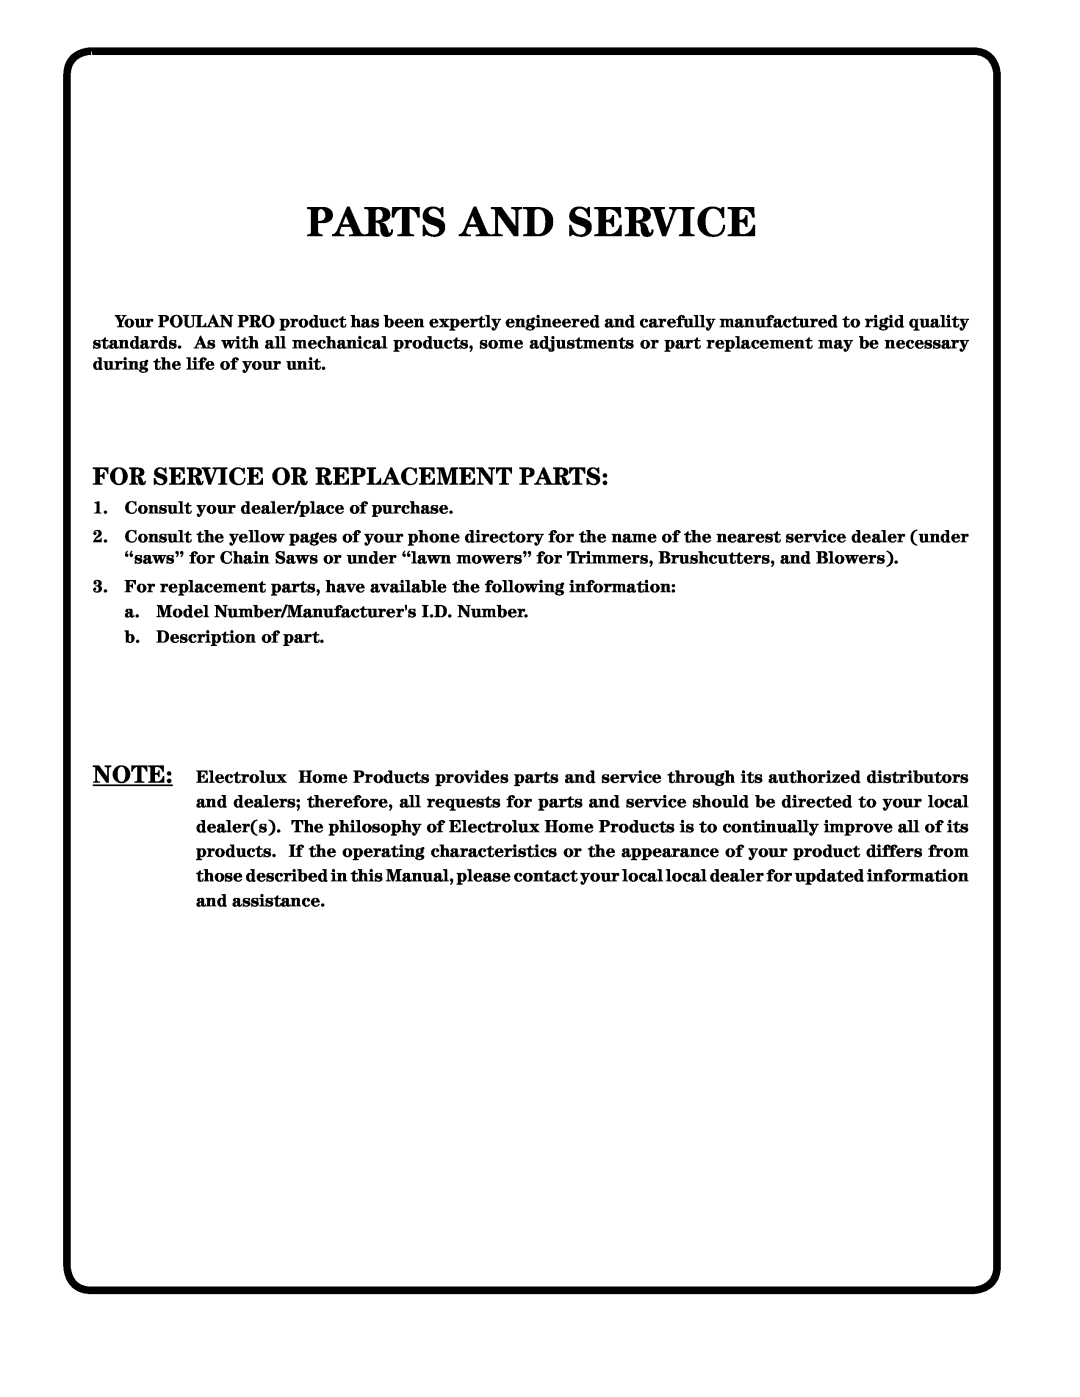 Poulan 184617 owner manual Parts And Service, For Service Or Replacement Parts 